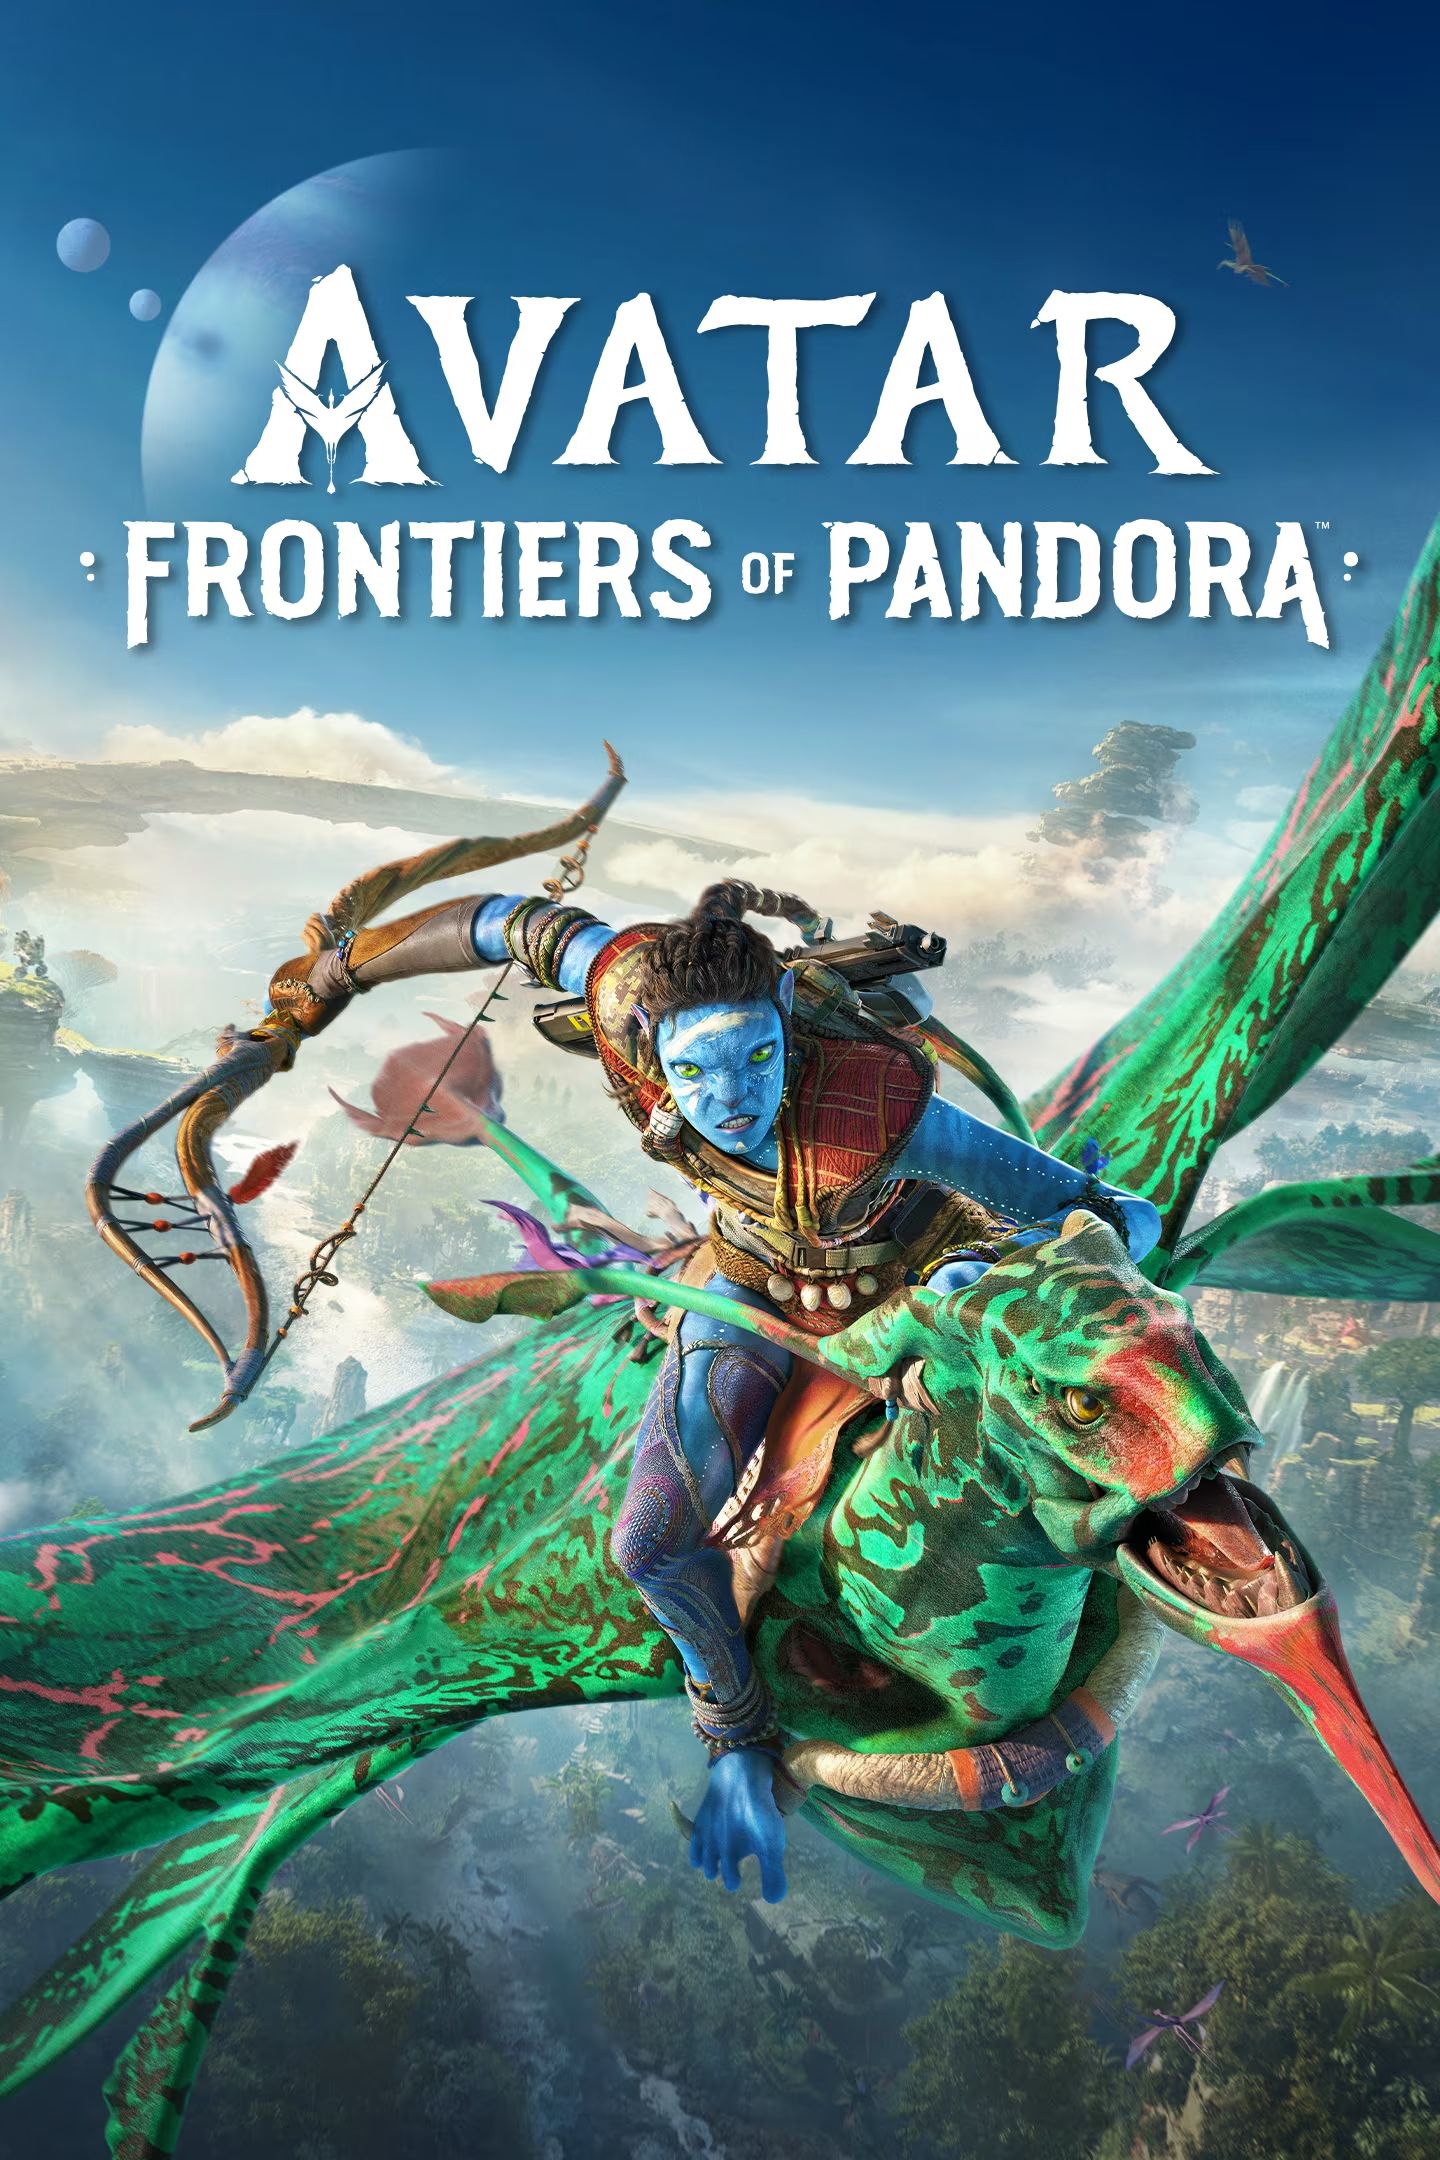 Avatar: Frontiers of Pandora PS5-exclusive features, explained - Dot Esports